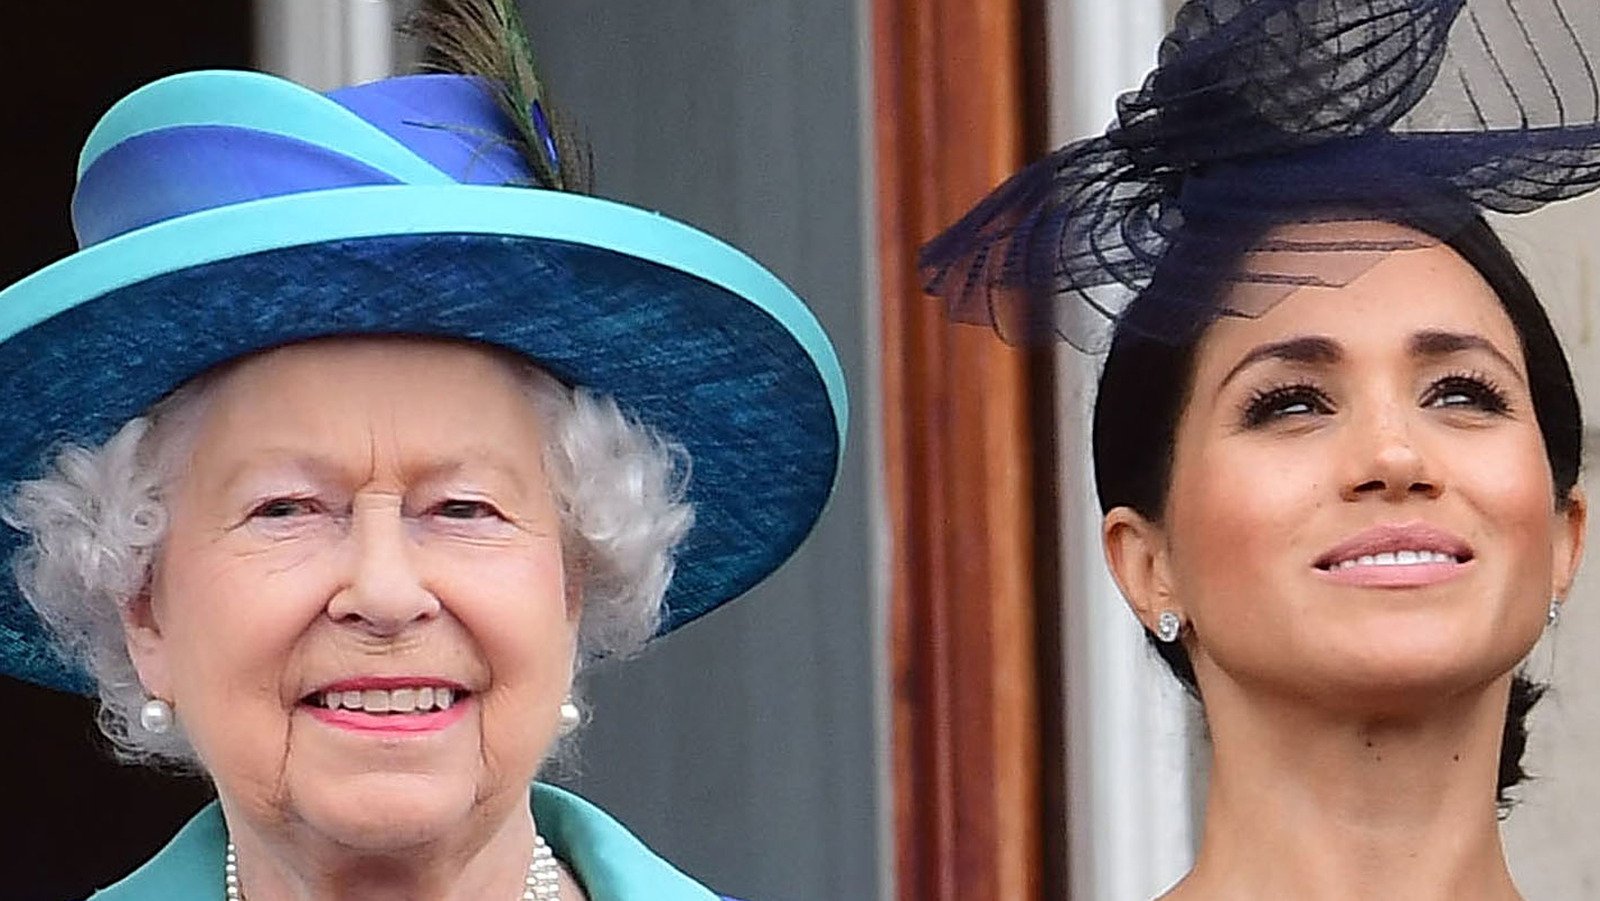 Meghan Markle Once Gave The Queen An Awkward Gift. Here's What We Know - The List